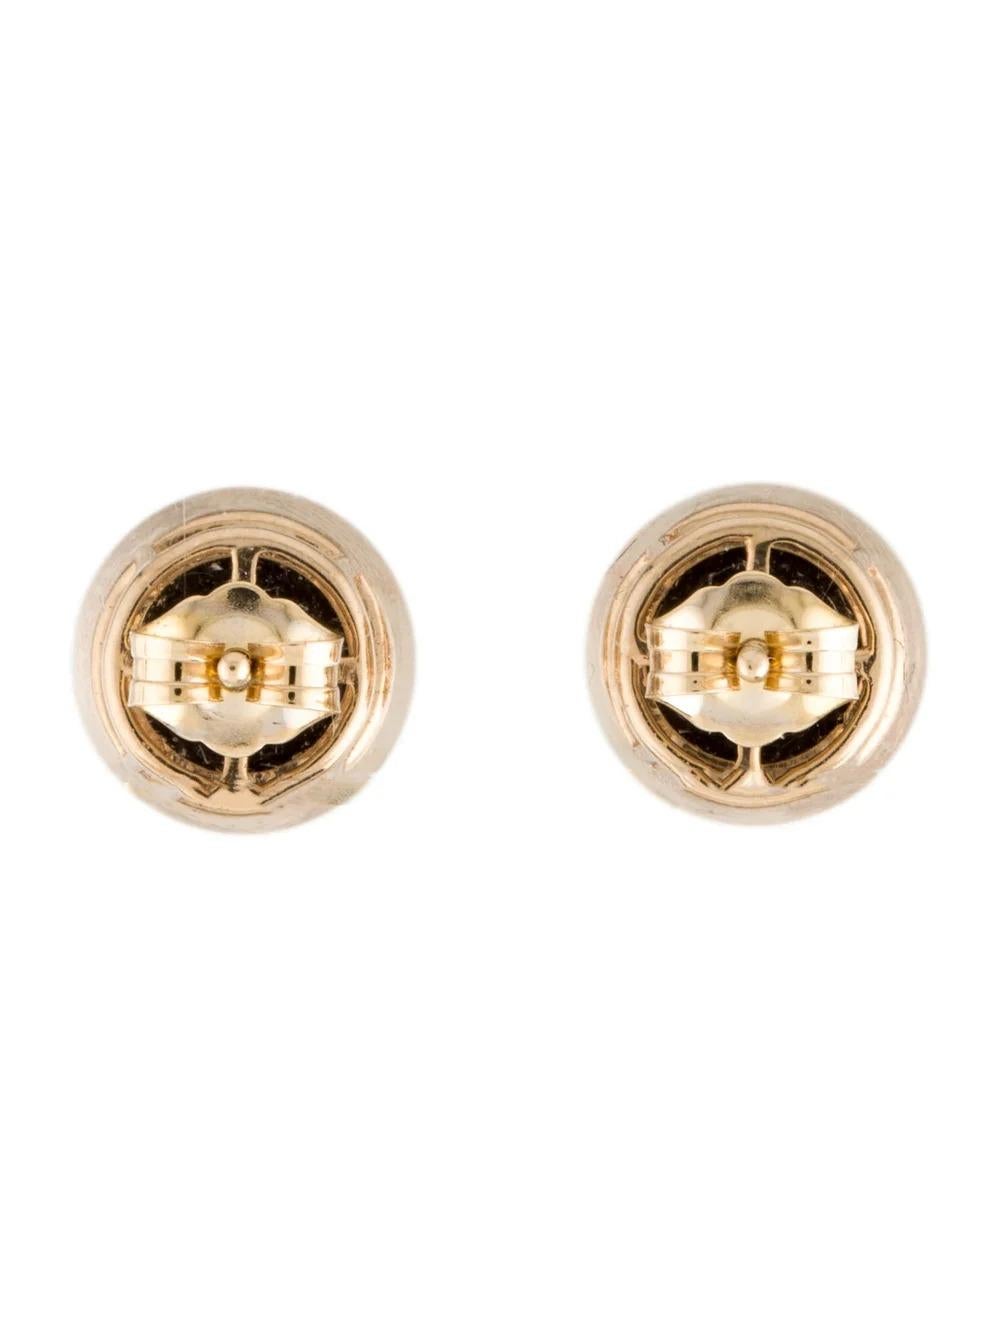 14K Diamond Stud Earrings 2.57ctw - Timeless Beauty, Sparkling Brilliance In New Condition For Sale In Holtsville, NY